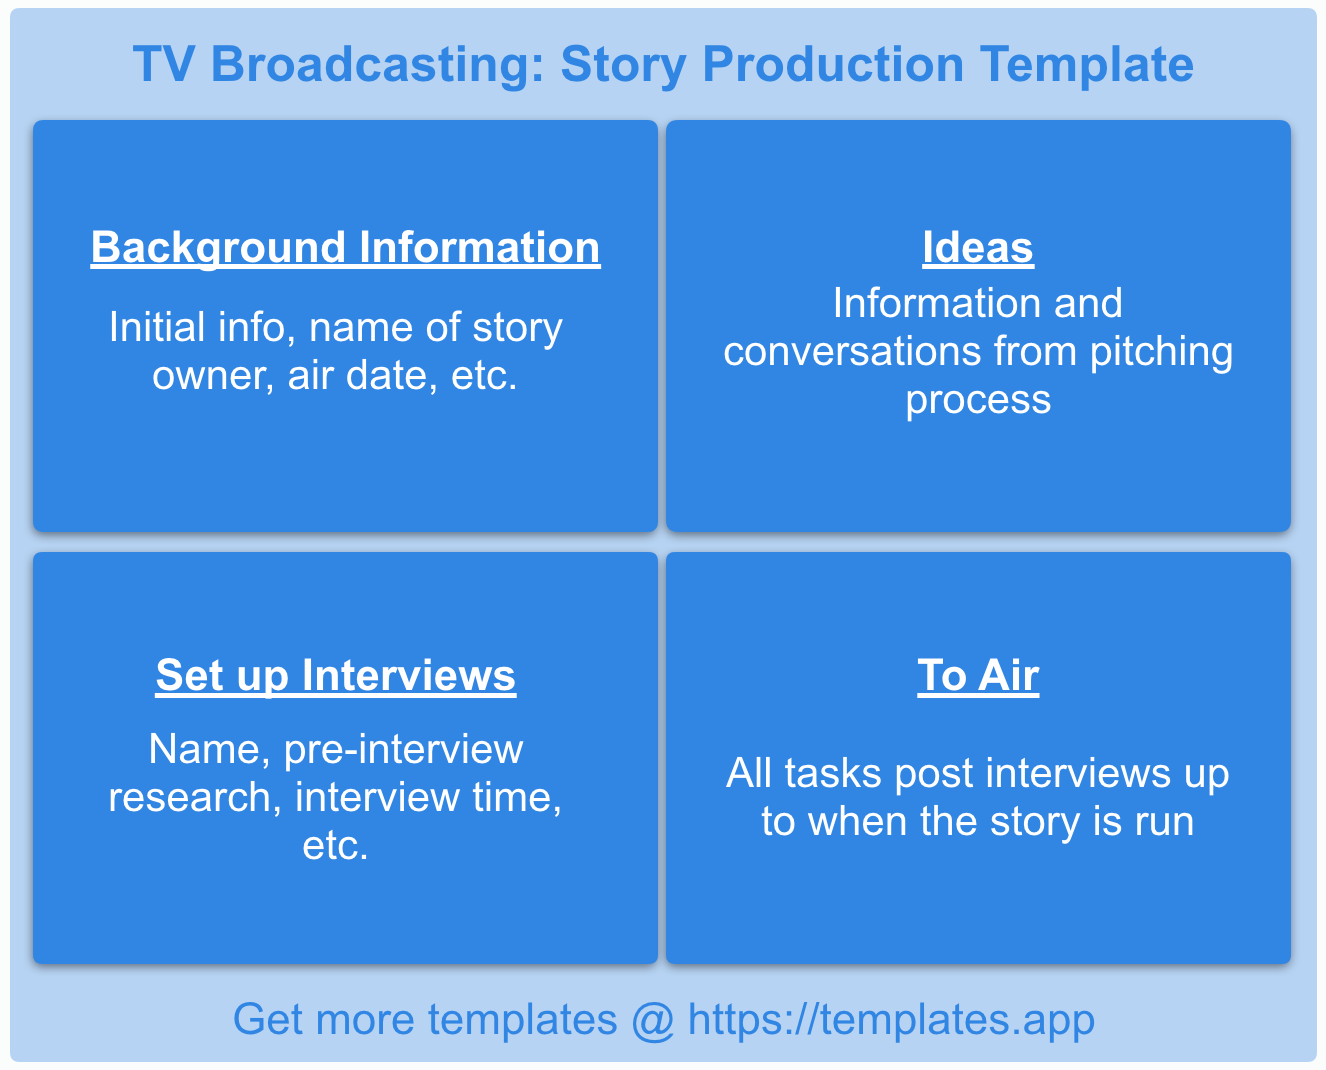 TV Broadcasting: Story Production Template by templates.app